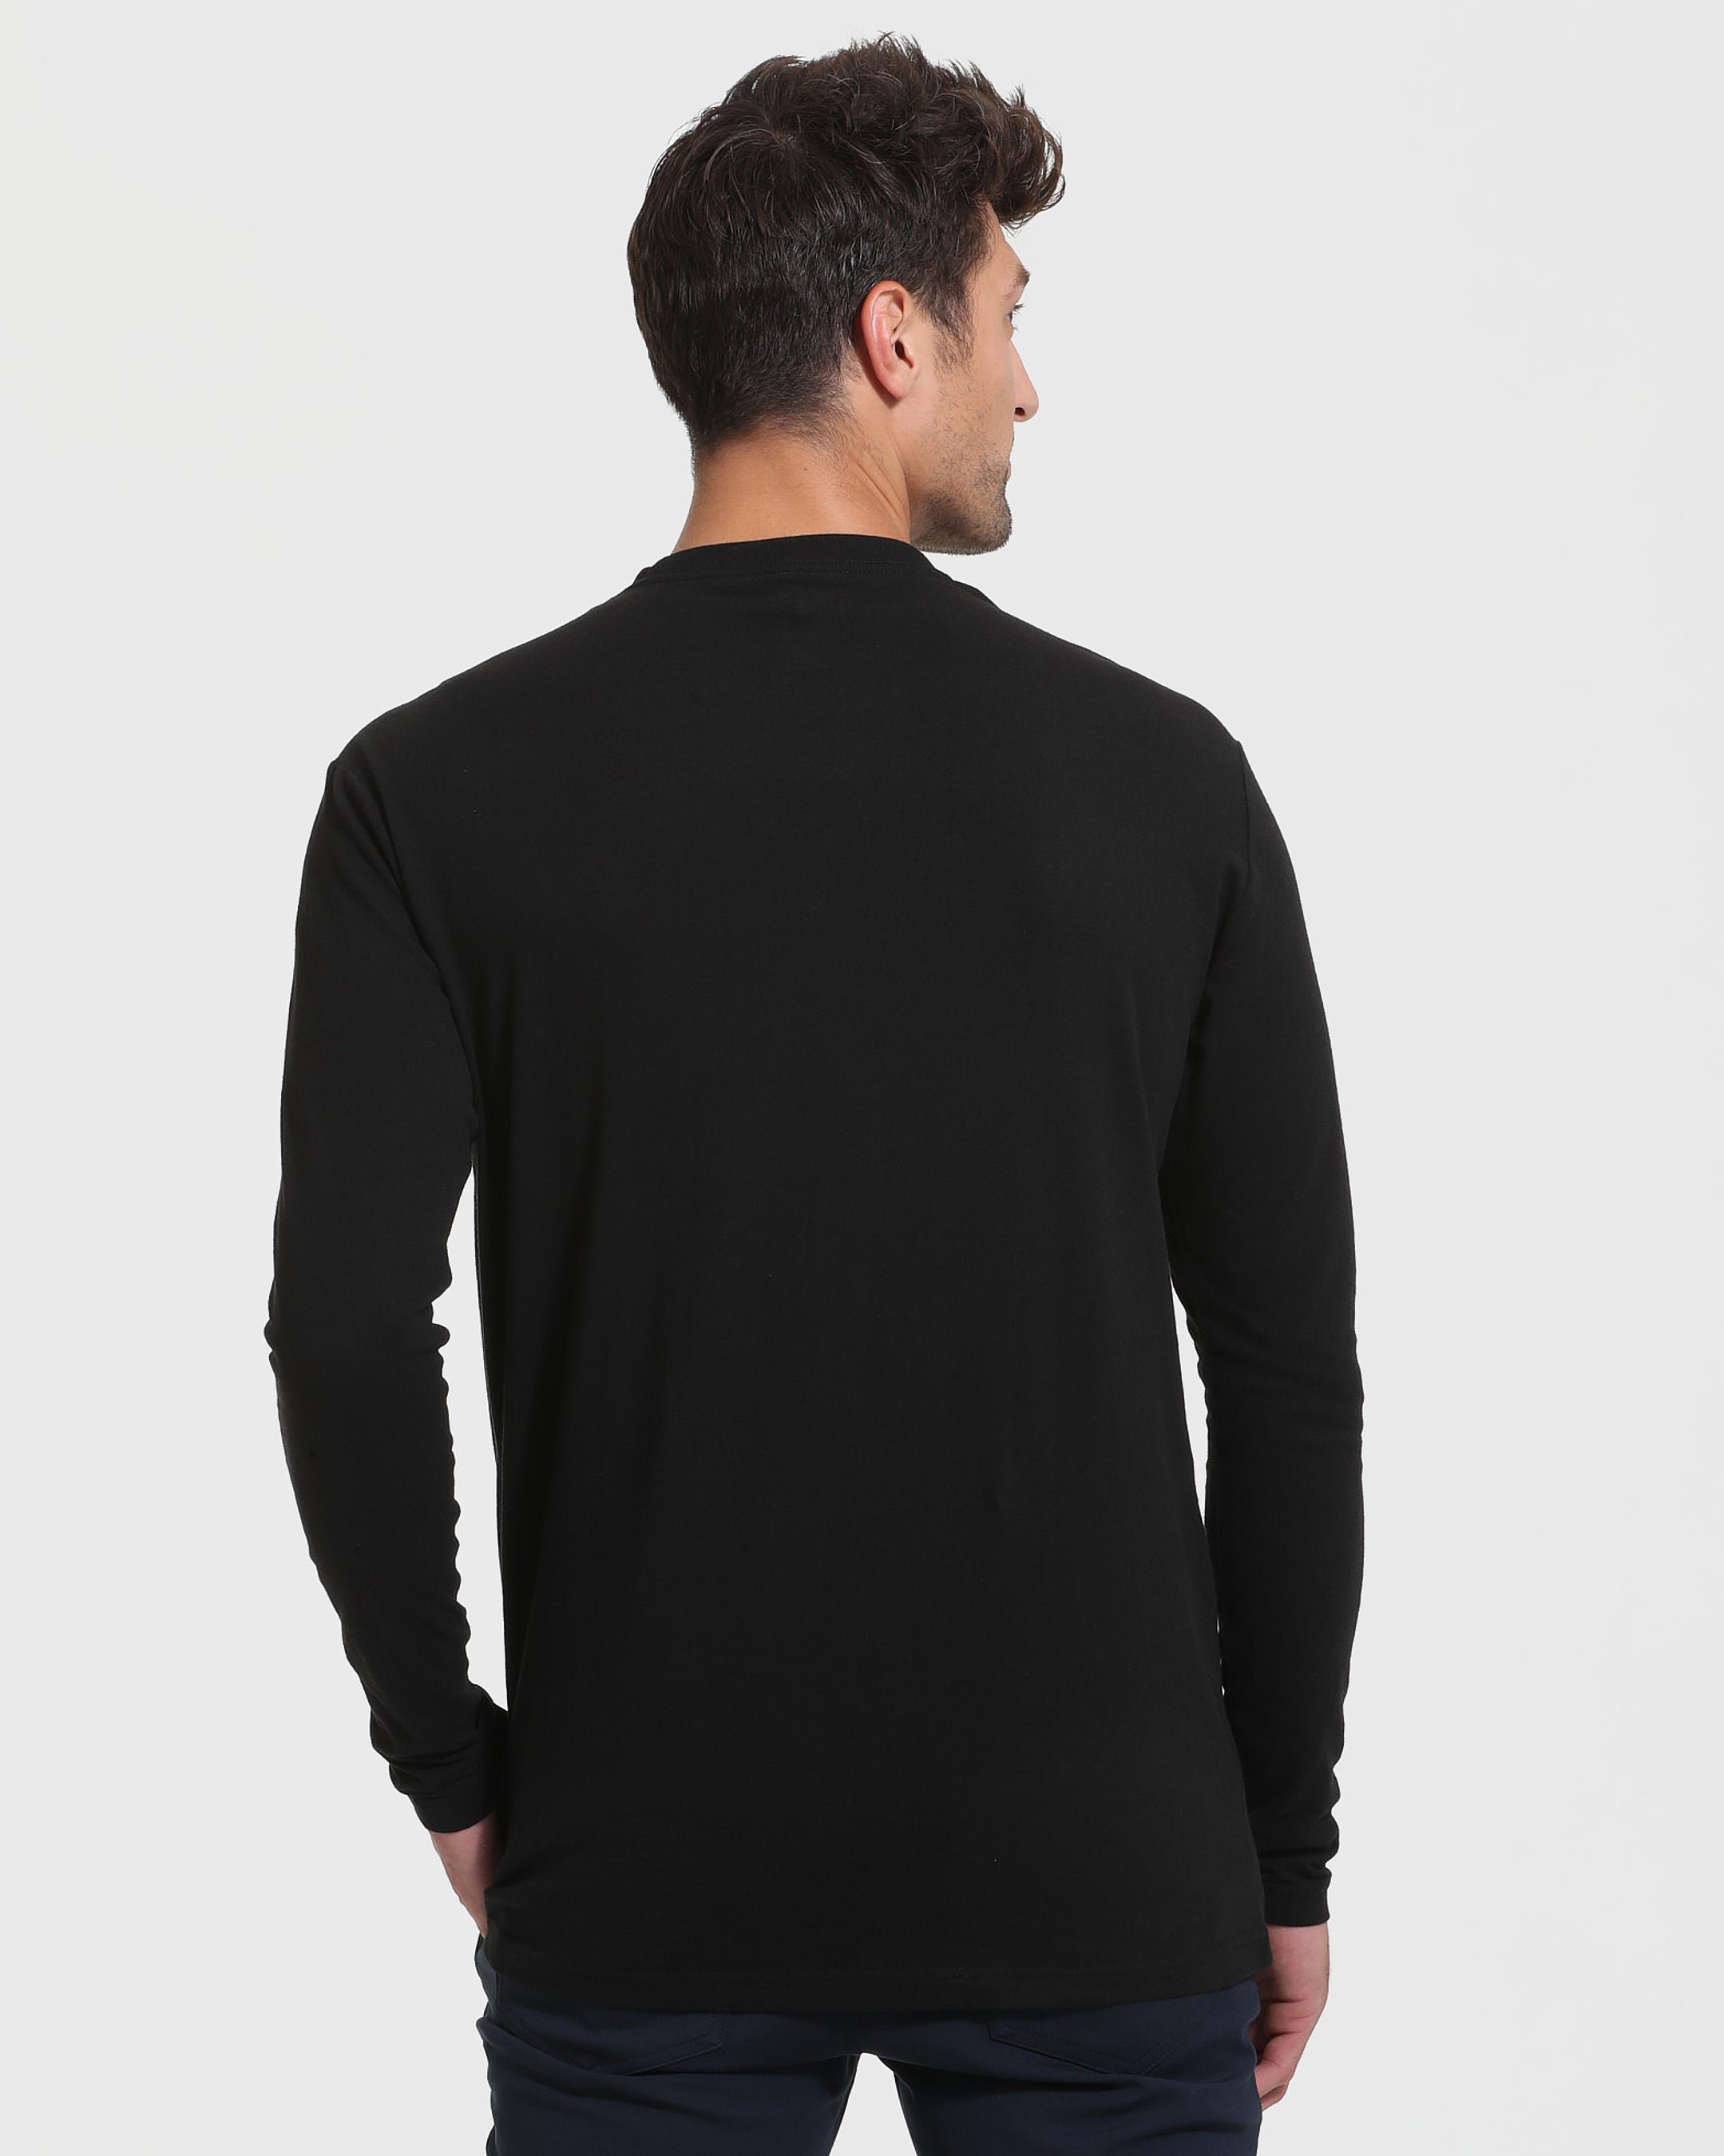 All Black Tall Long Sleeve Crew 3-Pack